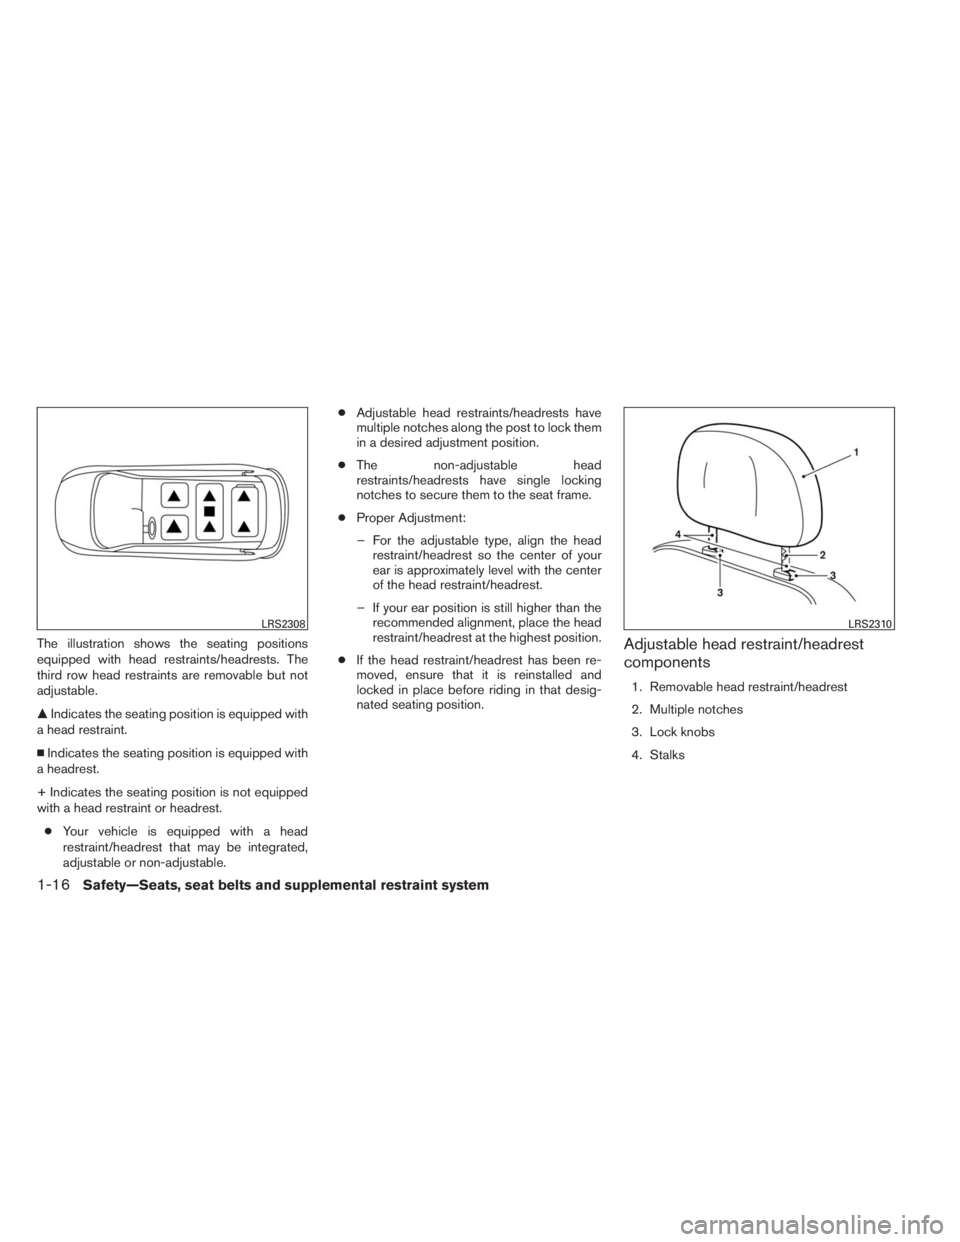 INFINITI QX60 2014 User Guide The illustration shows the seating positions
equipped with head restraints/headrests. The
third row head restraints are removable but not
adjustable.
Indicates the seating position is equipped with
a